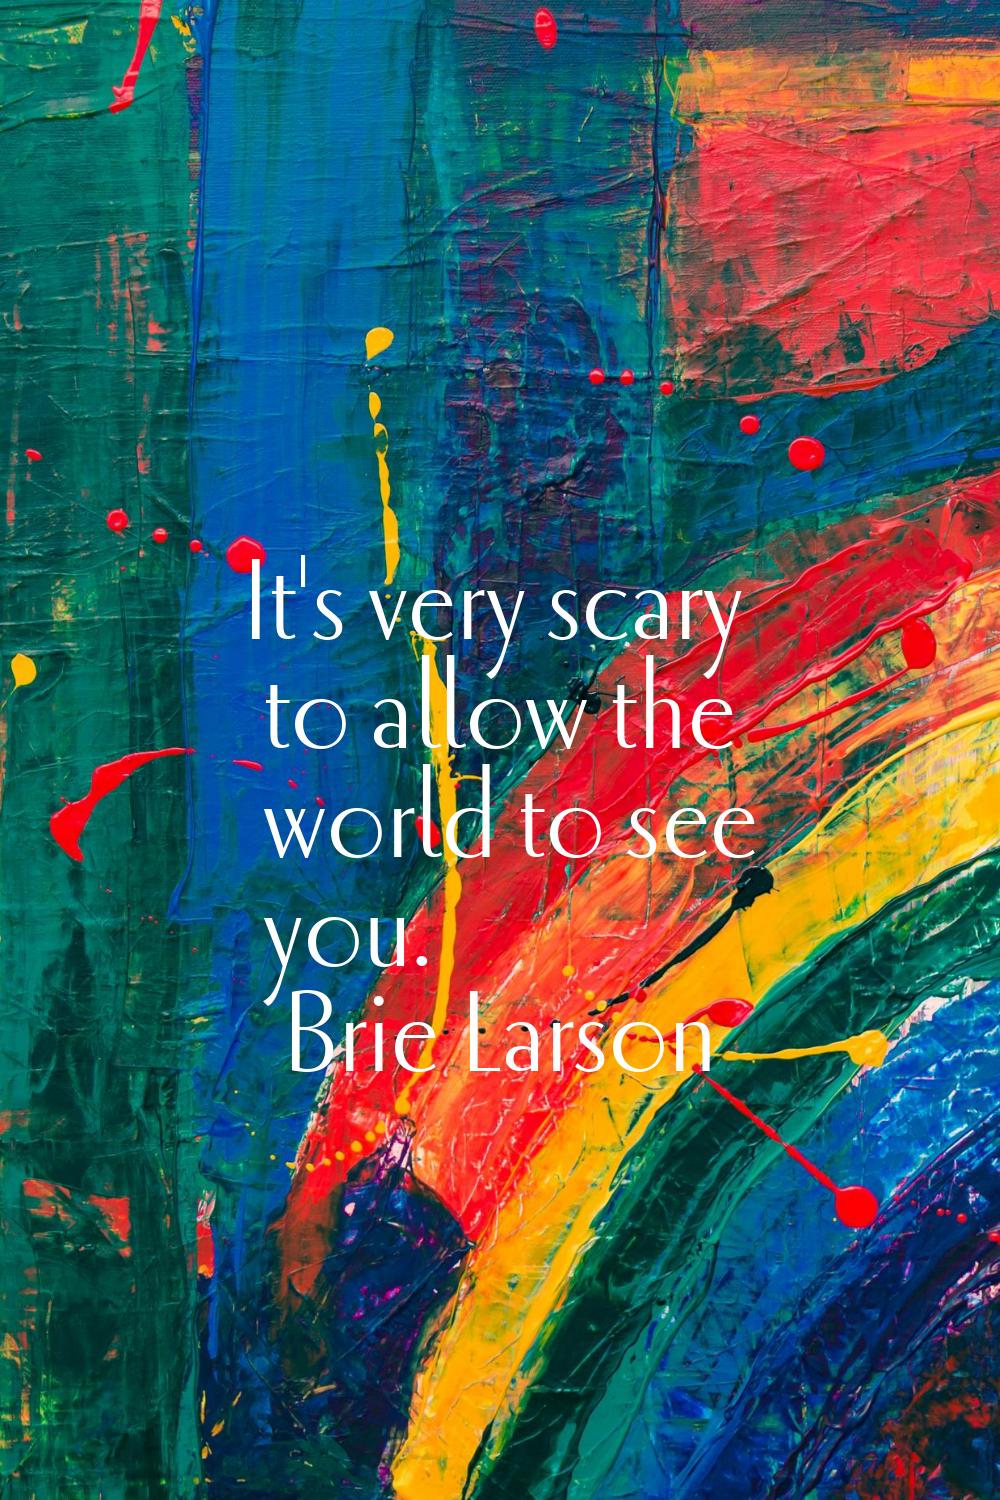 It's very scary to allow the world to see you.